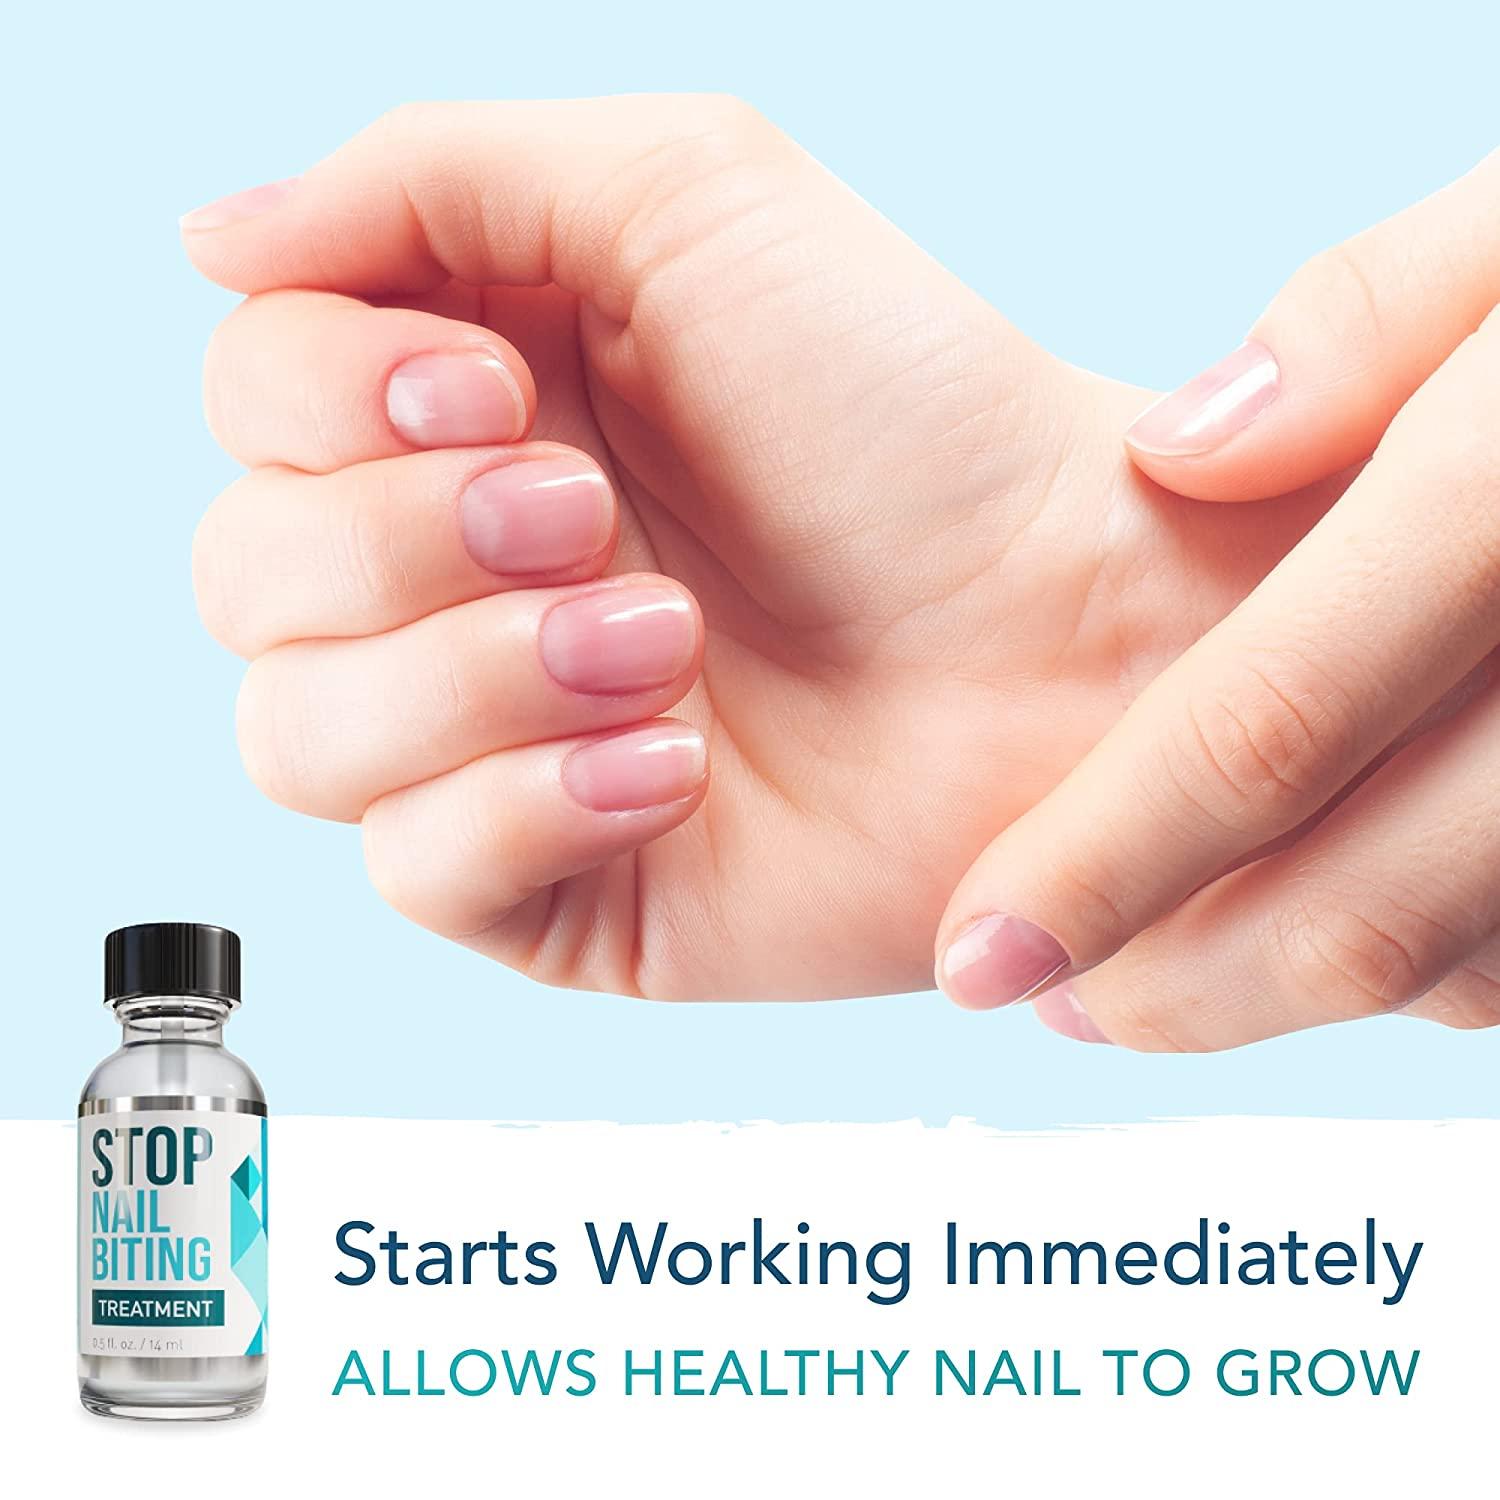 STOP NAIL BITING Treatment - Nail Polish To Help Stop Biting Nails, Bitter  Taste, Easy To Apply, Safe For Children ( Fluid Ounces)